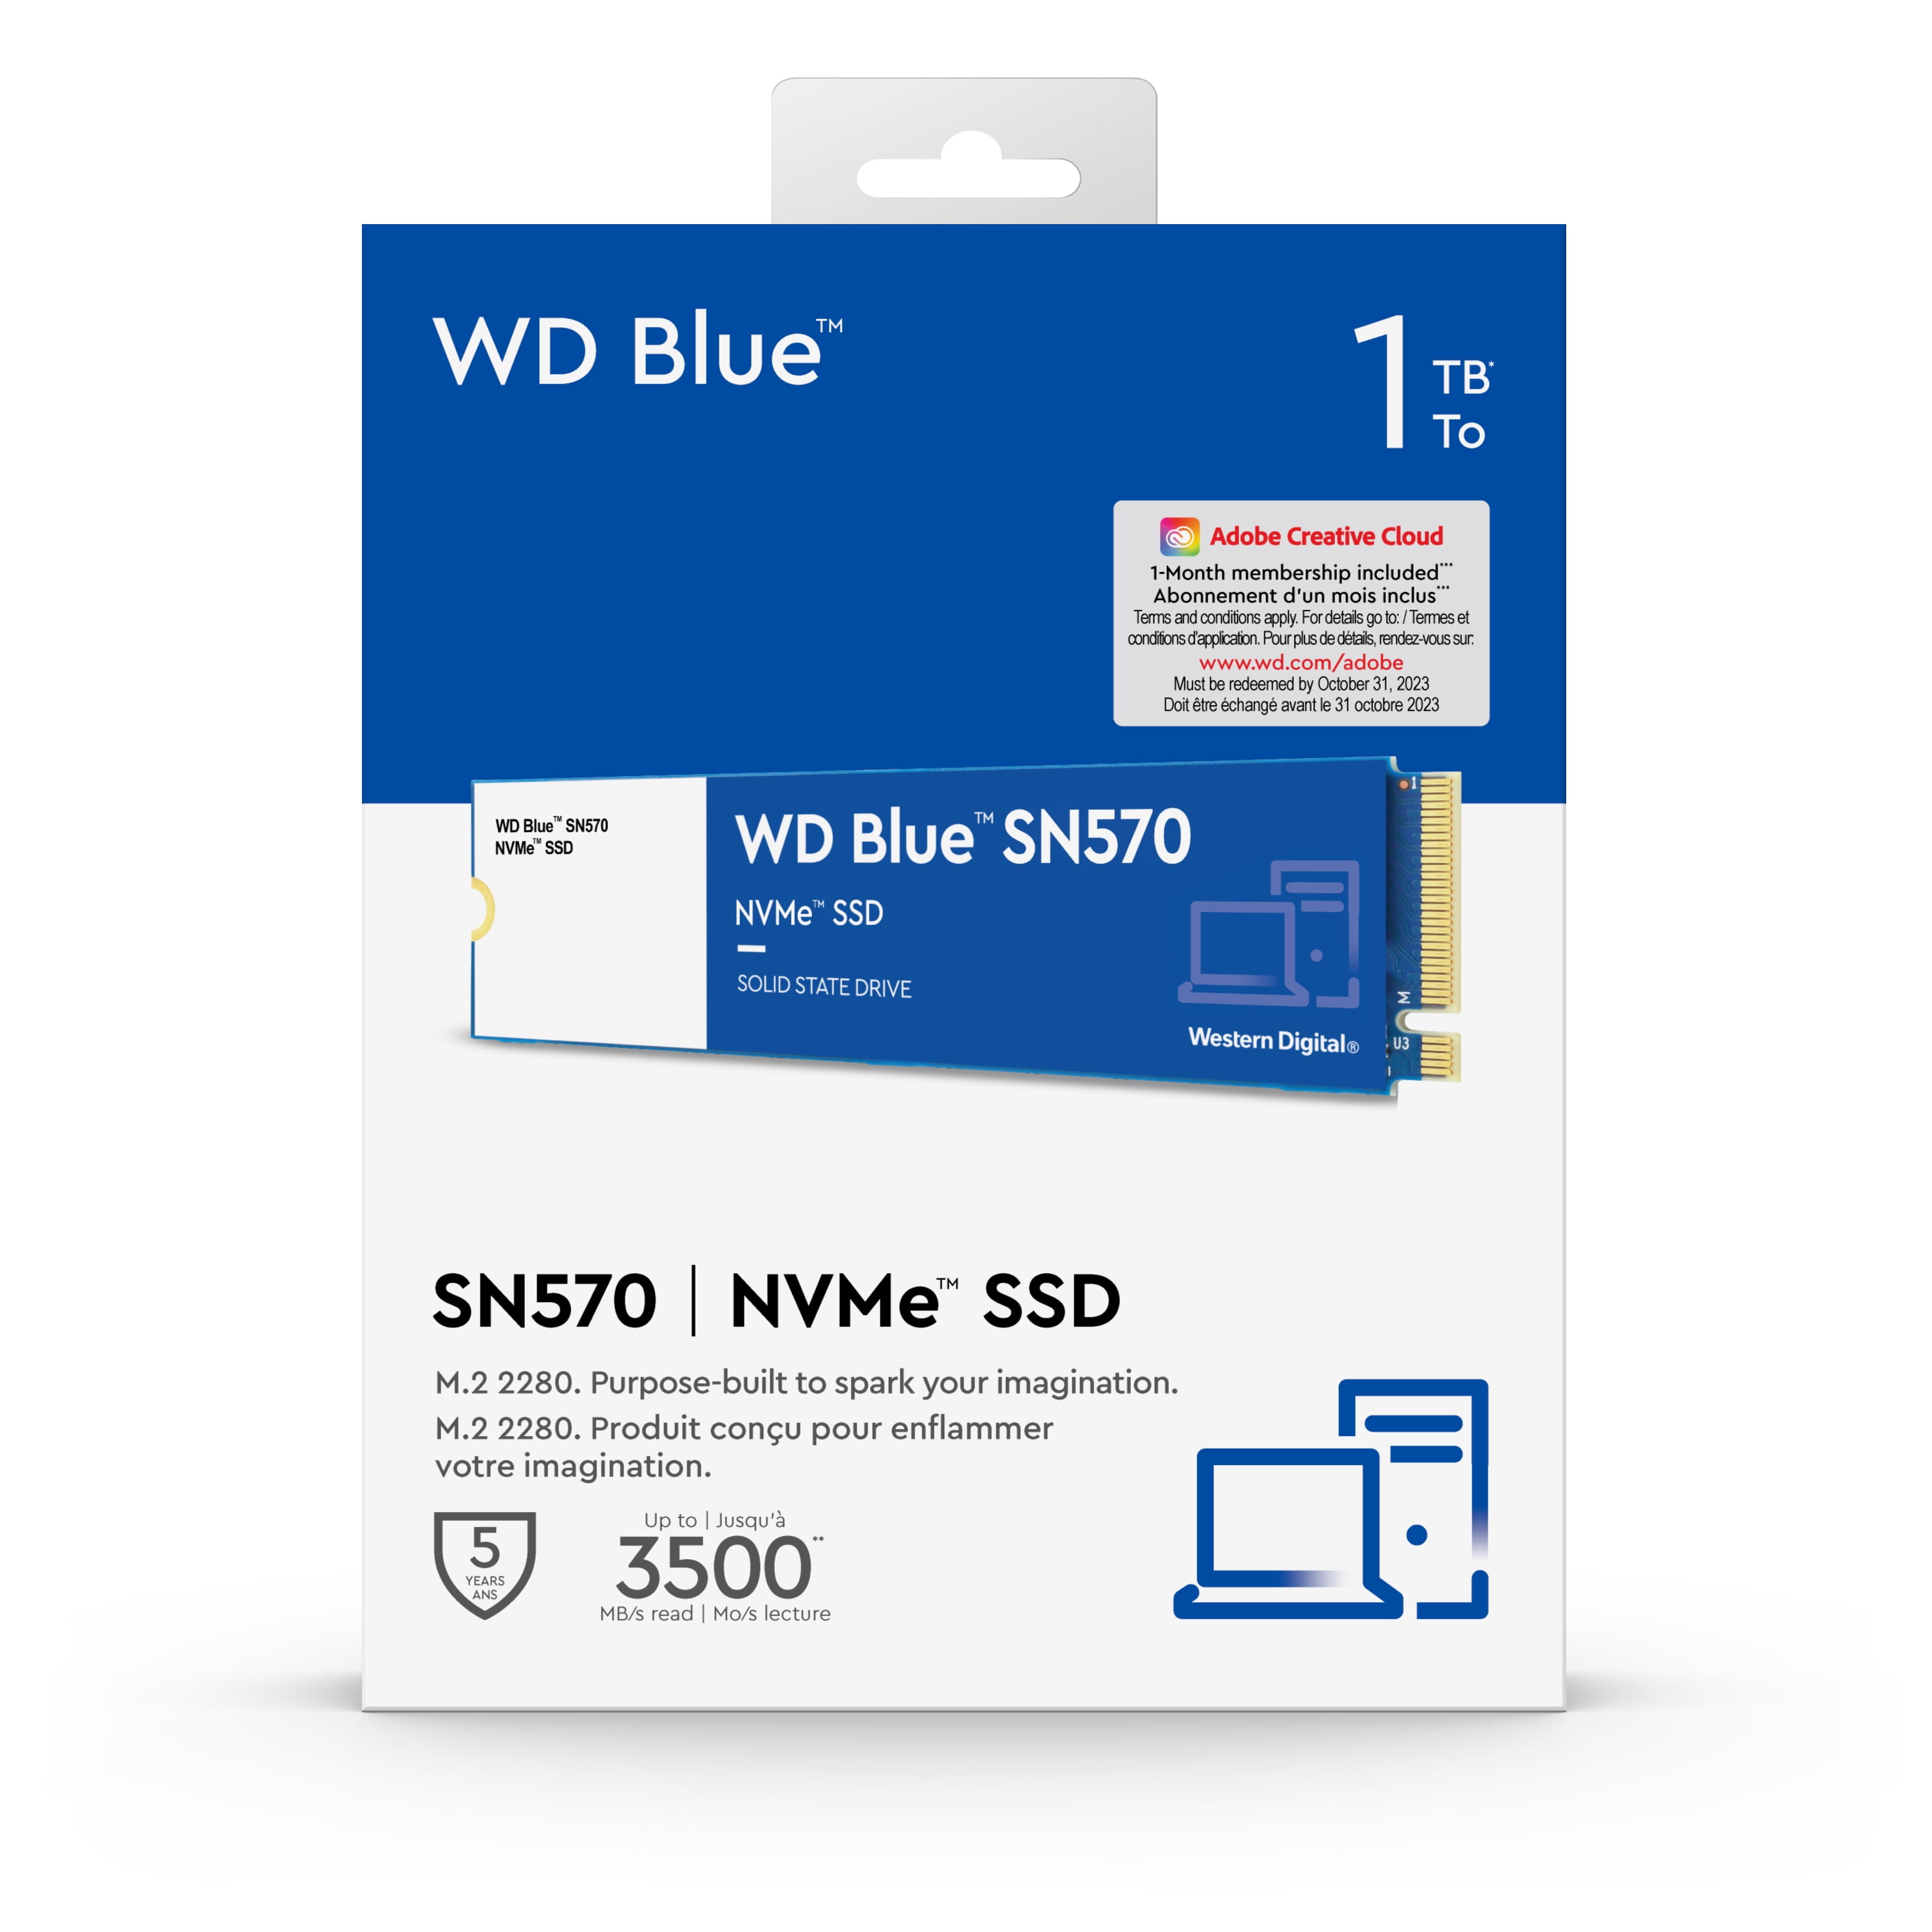 Western Digital SSD WD Blue SN580 1 To - Disque SSD - LDLC